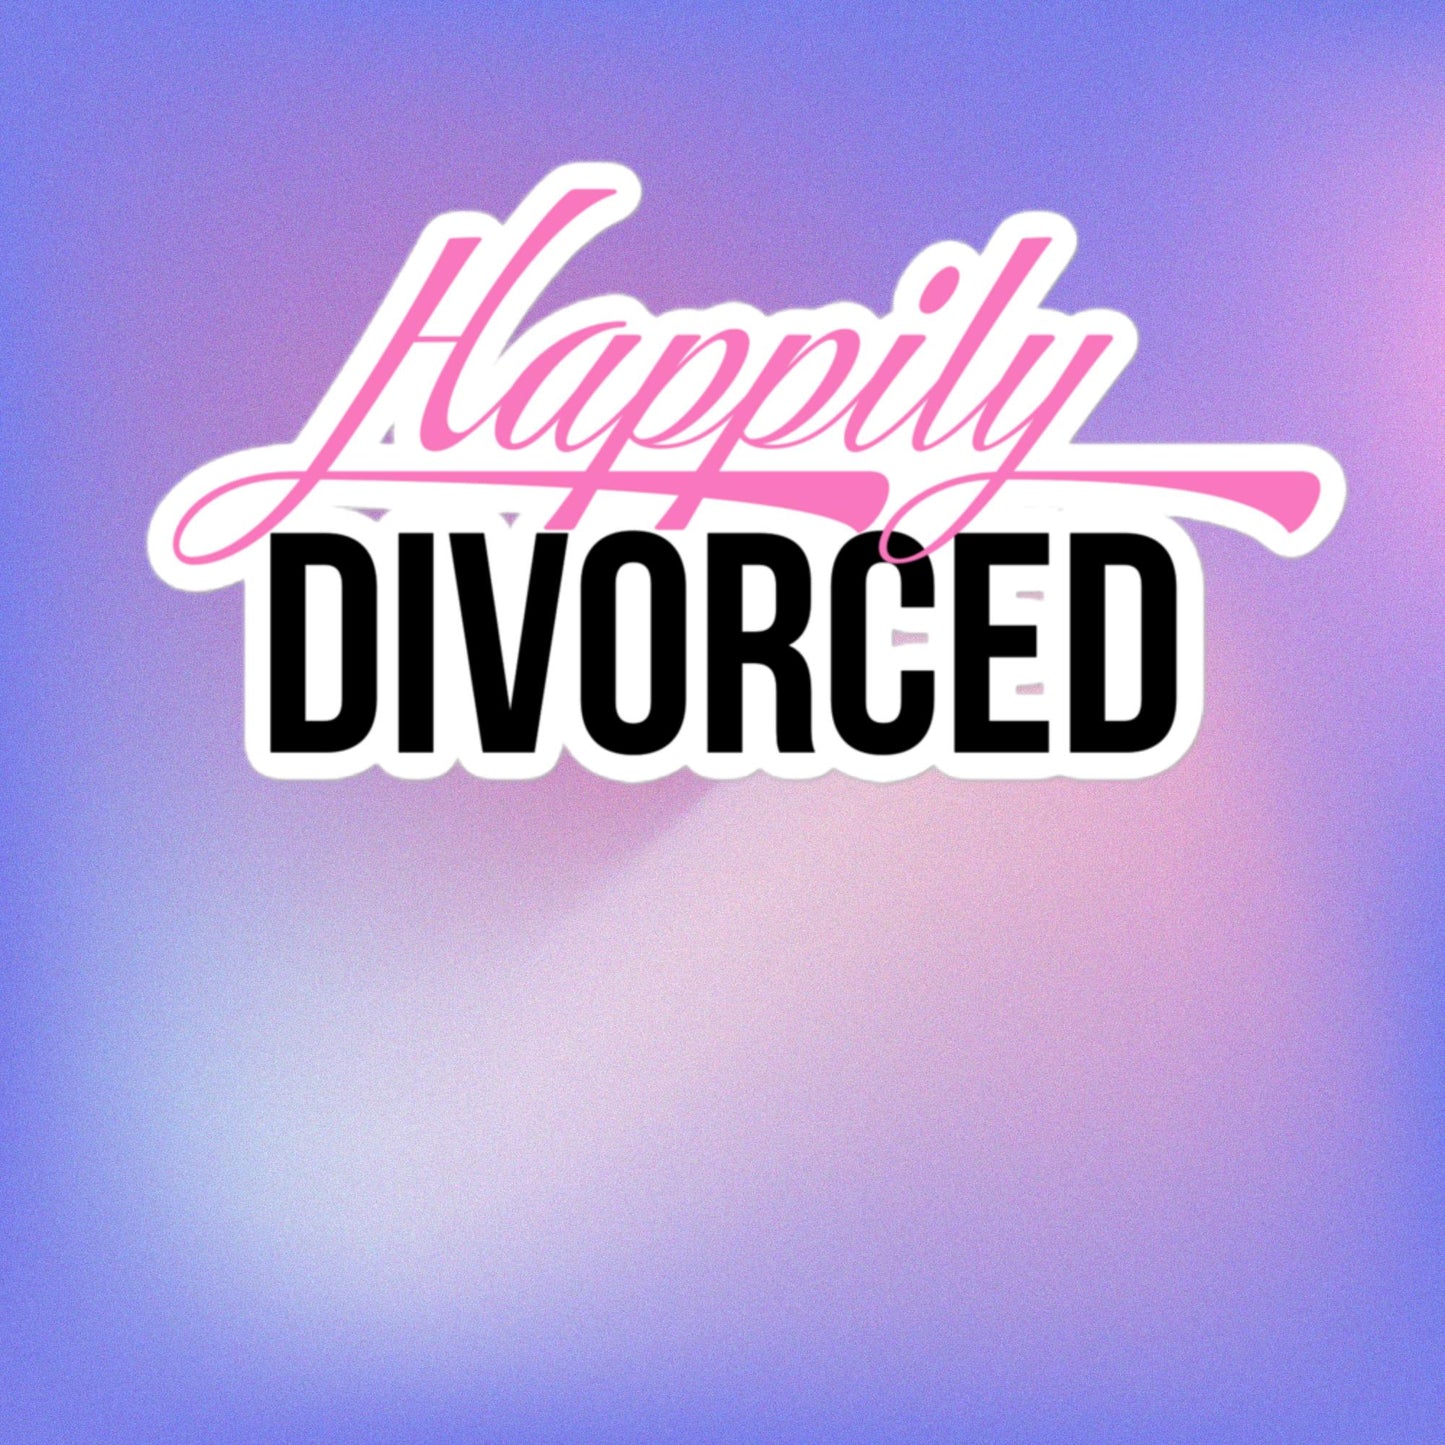 Celebration Mindset Exclusive: Happily Divorced Bubble-free stickers